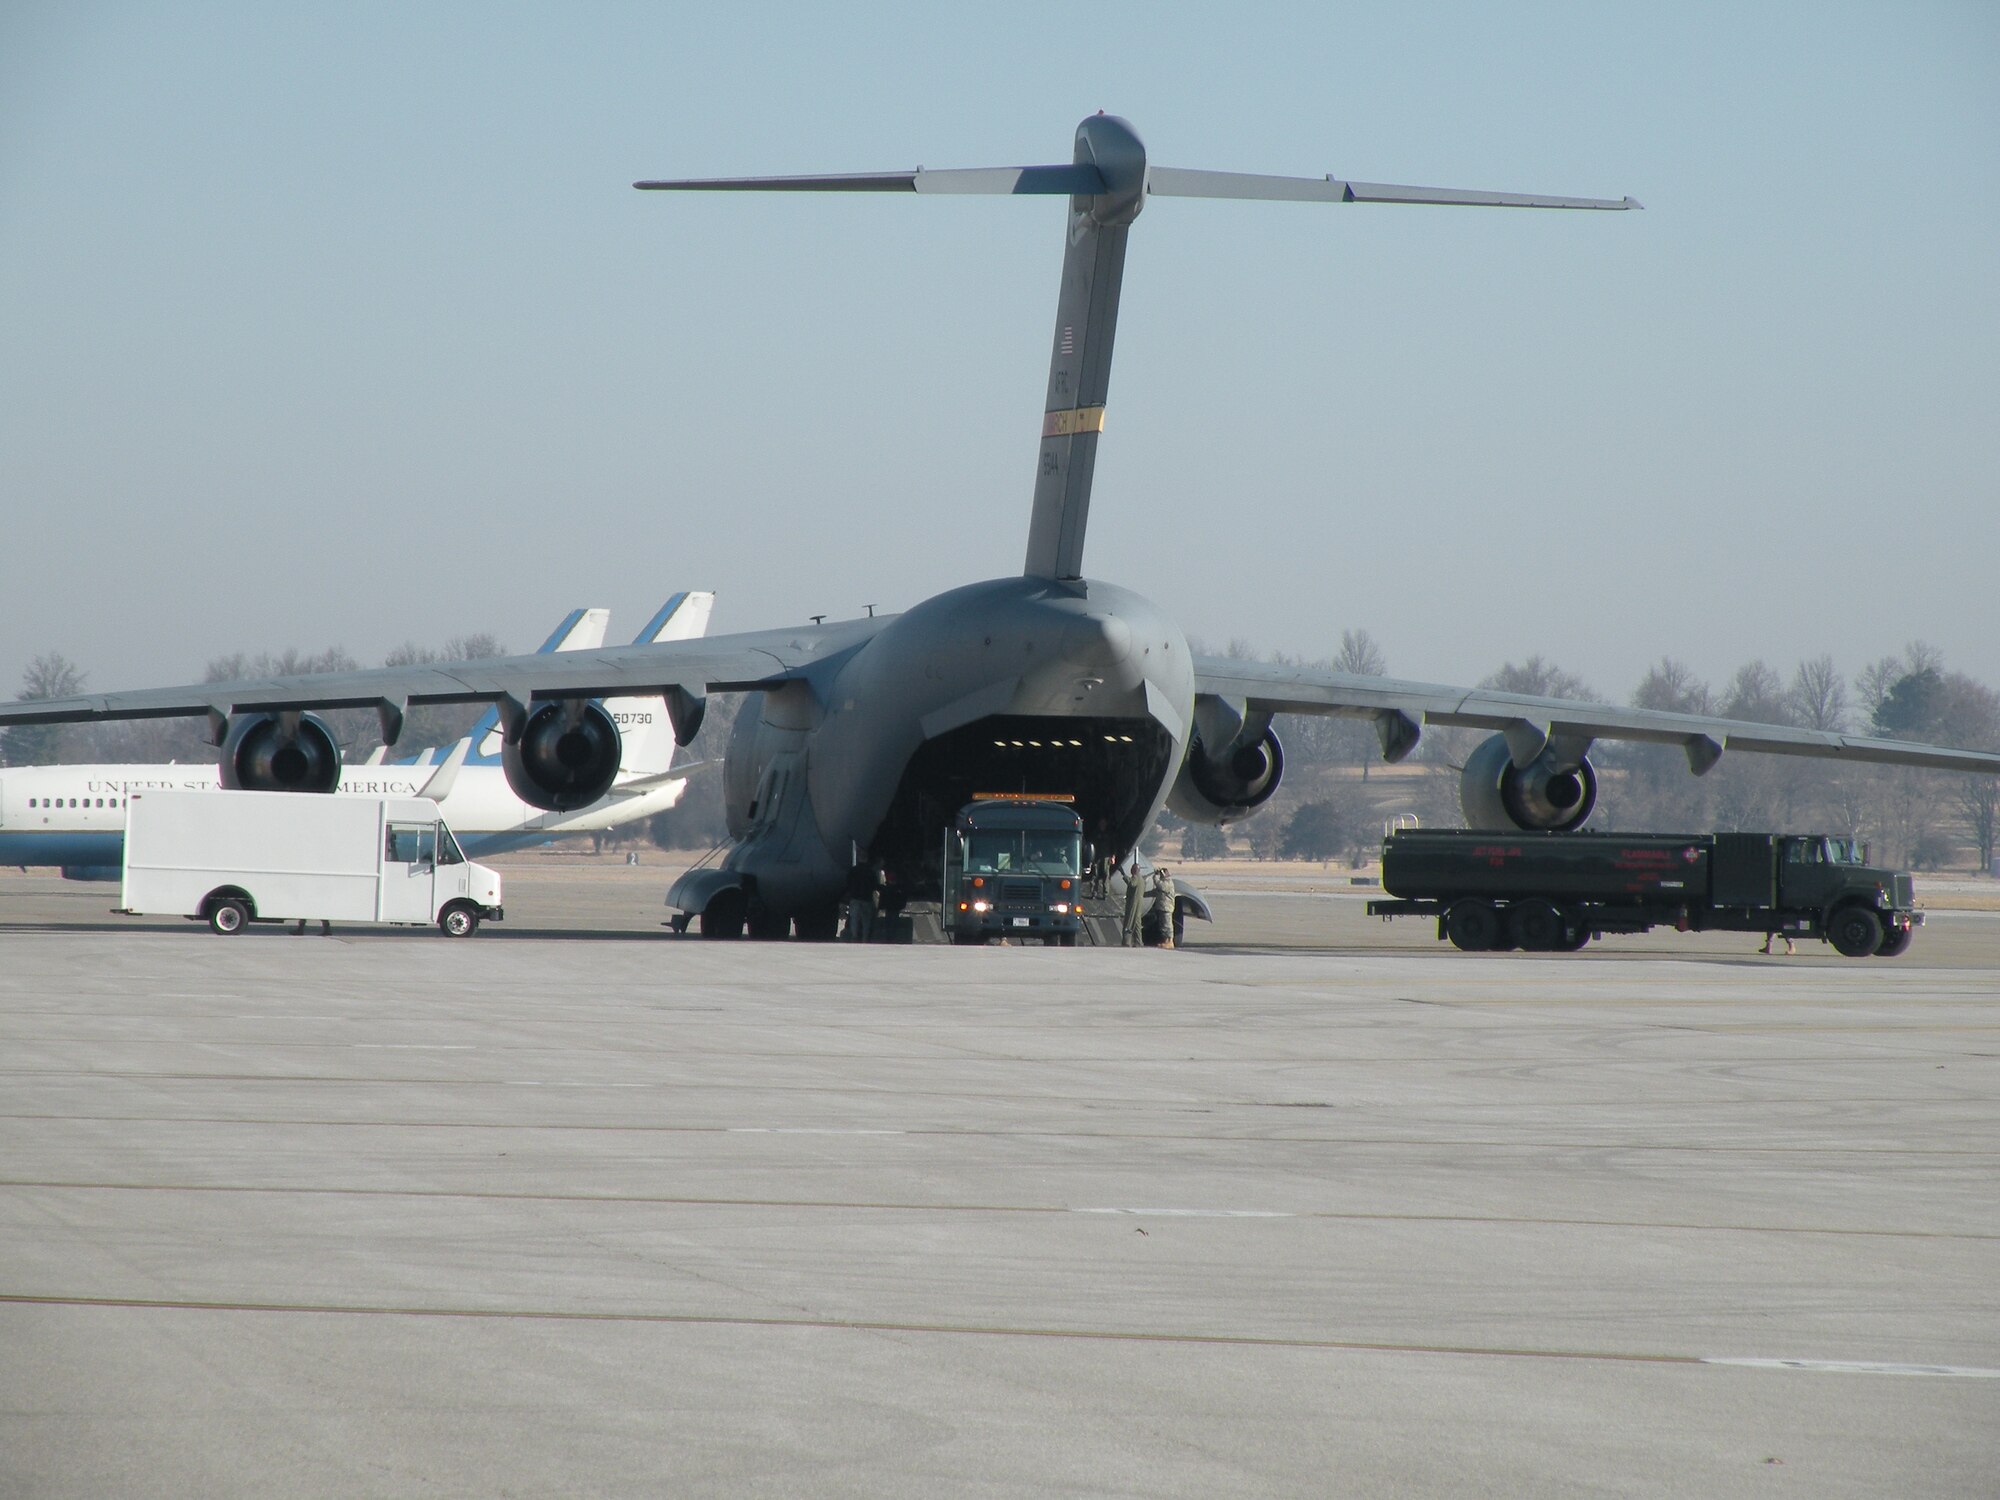 Patients are offloaded from an arriving C-17 Globemaster and into waiting vehicles on the flightline at Scott Air Force Base March 6, 2010. Two ambulatory patients from this flight were loaded into a waiting C-21A aircraft marking the historic first aeromedical evacuation flight for the 103rd Airlift Wing, Conn. Air National Guard. (U.S. Air Force photo by Maj. Christopher P. Papa)